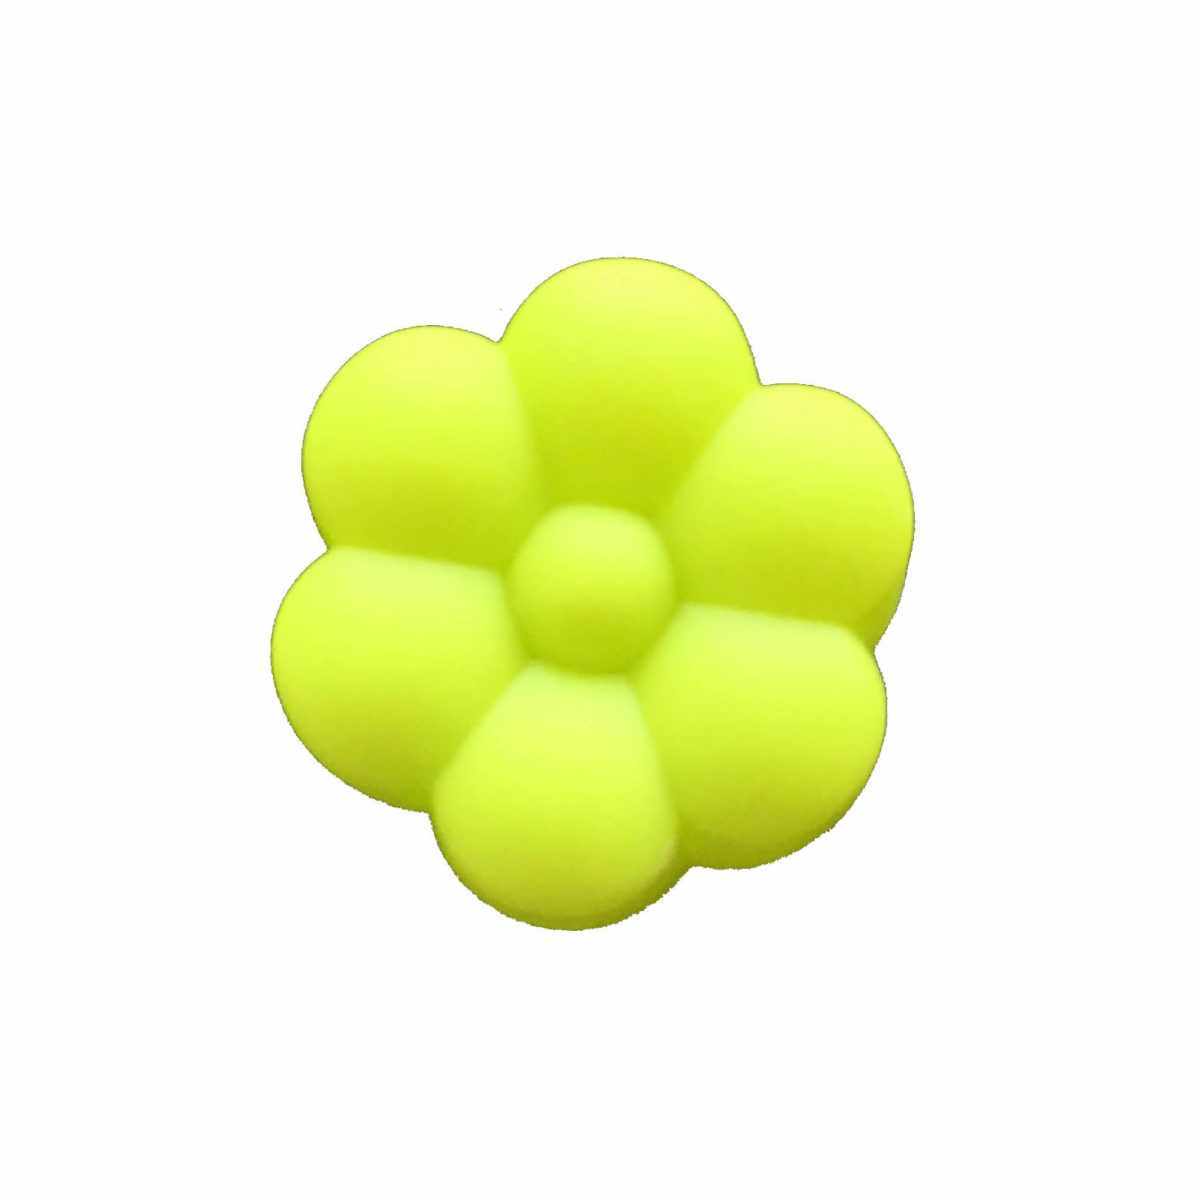 5cm green single cavity classic-shaped flower silicone mould